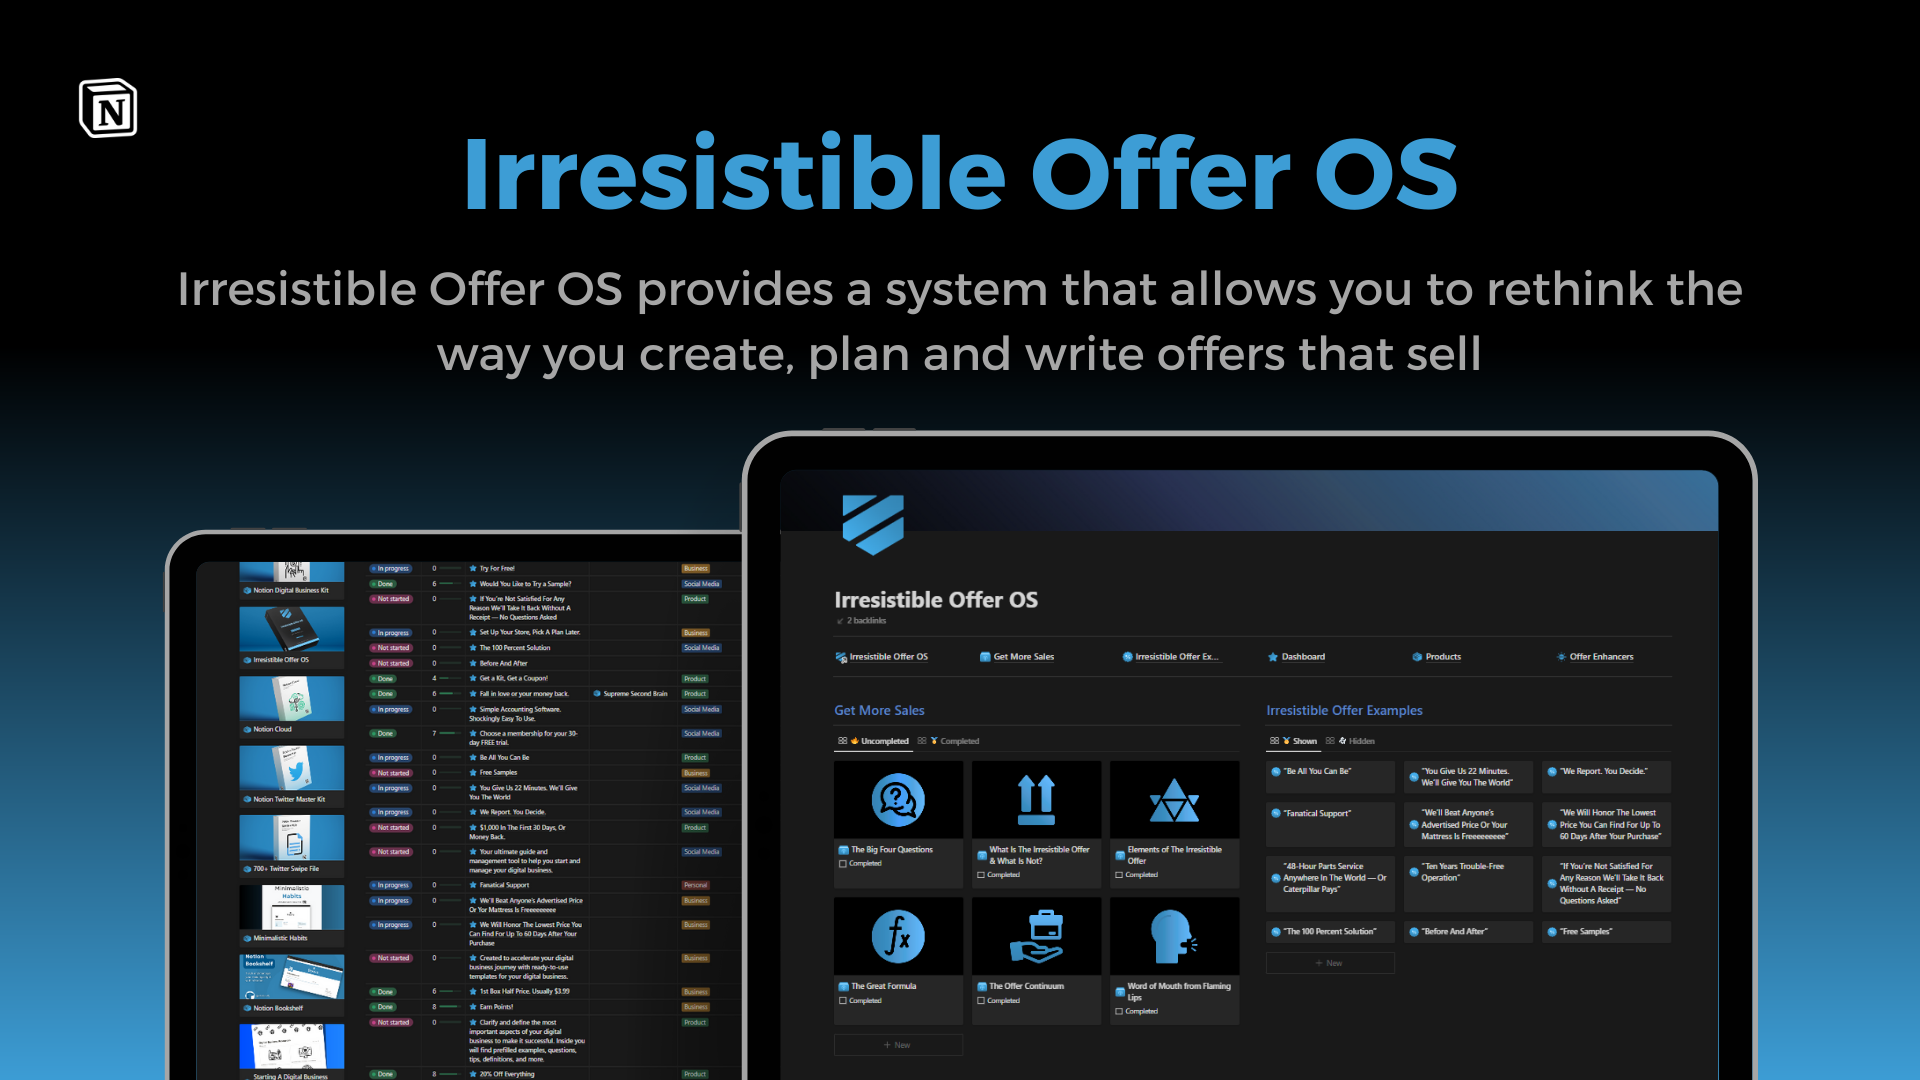 Irresistible Offer OS provides a system that allows you to rethink the way you create, plan and write offers that sell.
